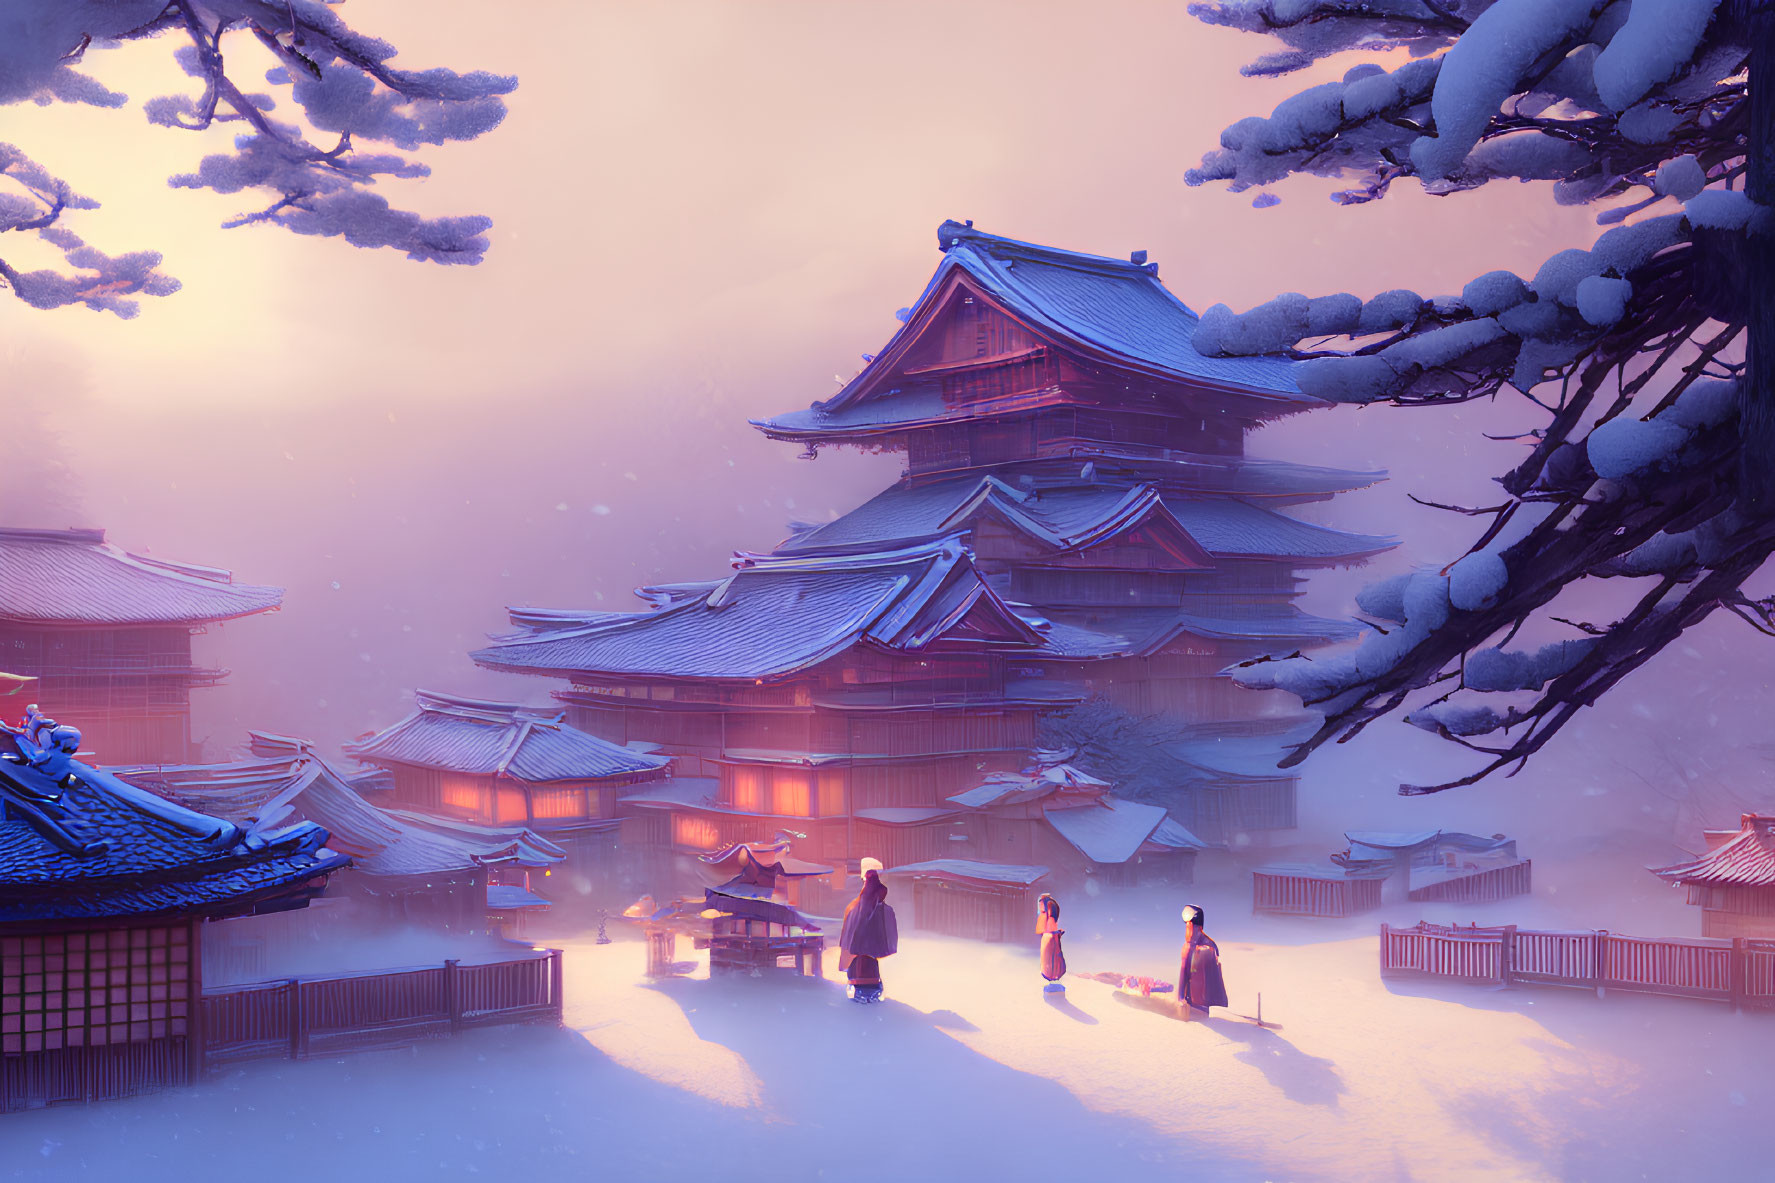 Snow-covered Japanese buildings at twilight with people and tree.